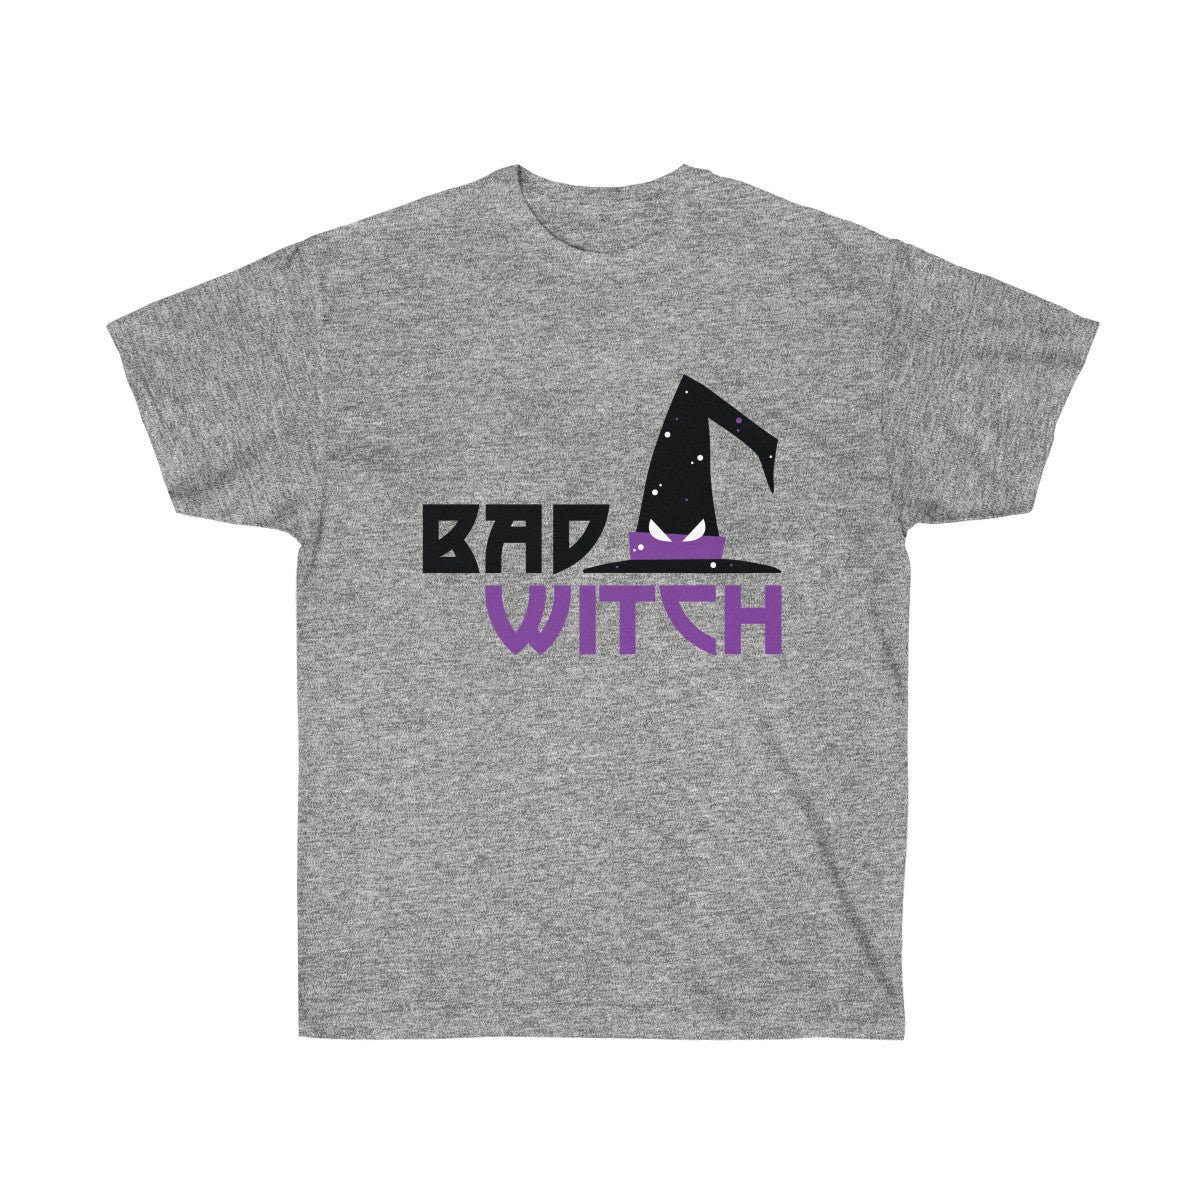 Bad Witch - Halloween Shirts - Tees - Unisex Cotton T-Shirts